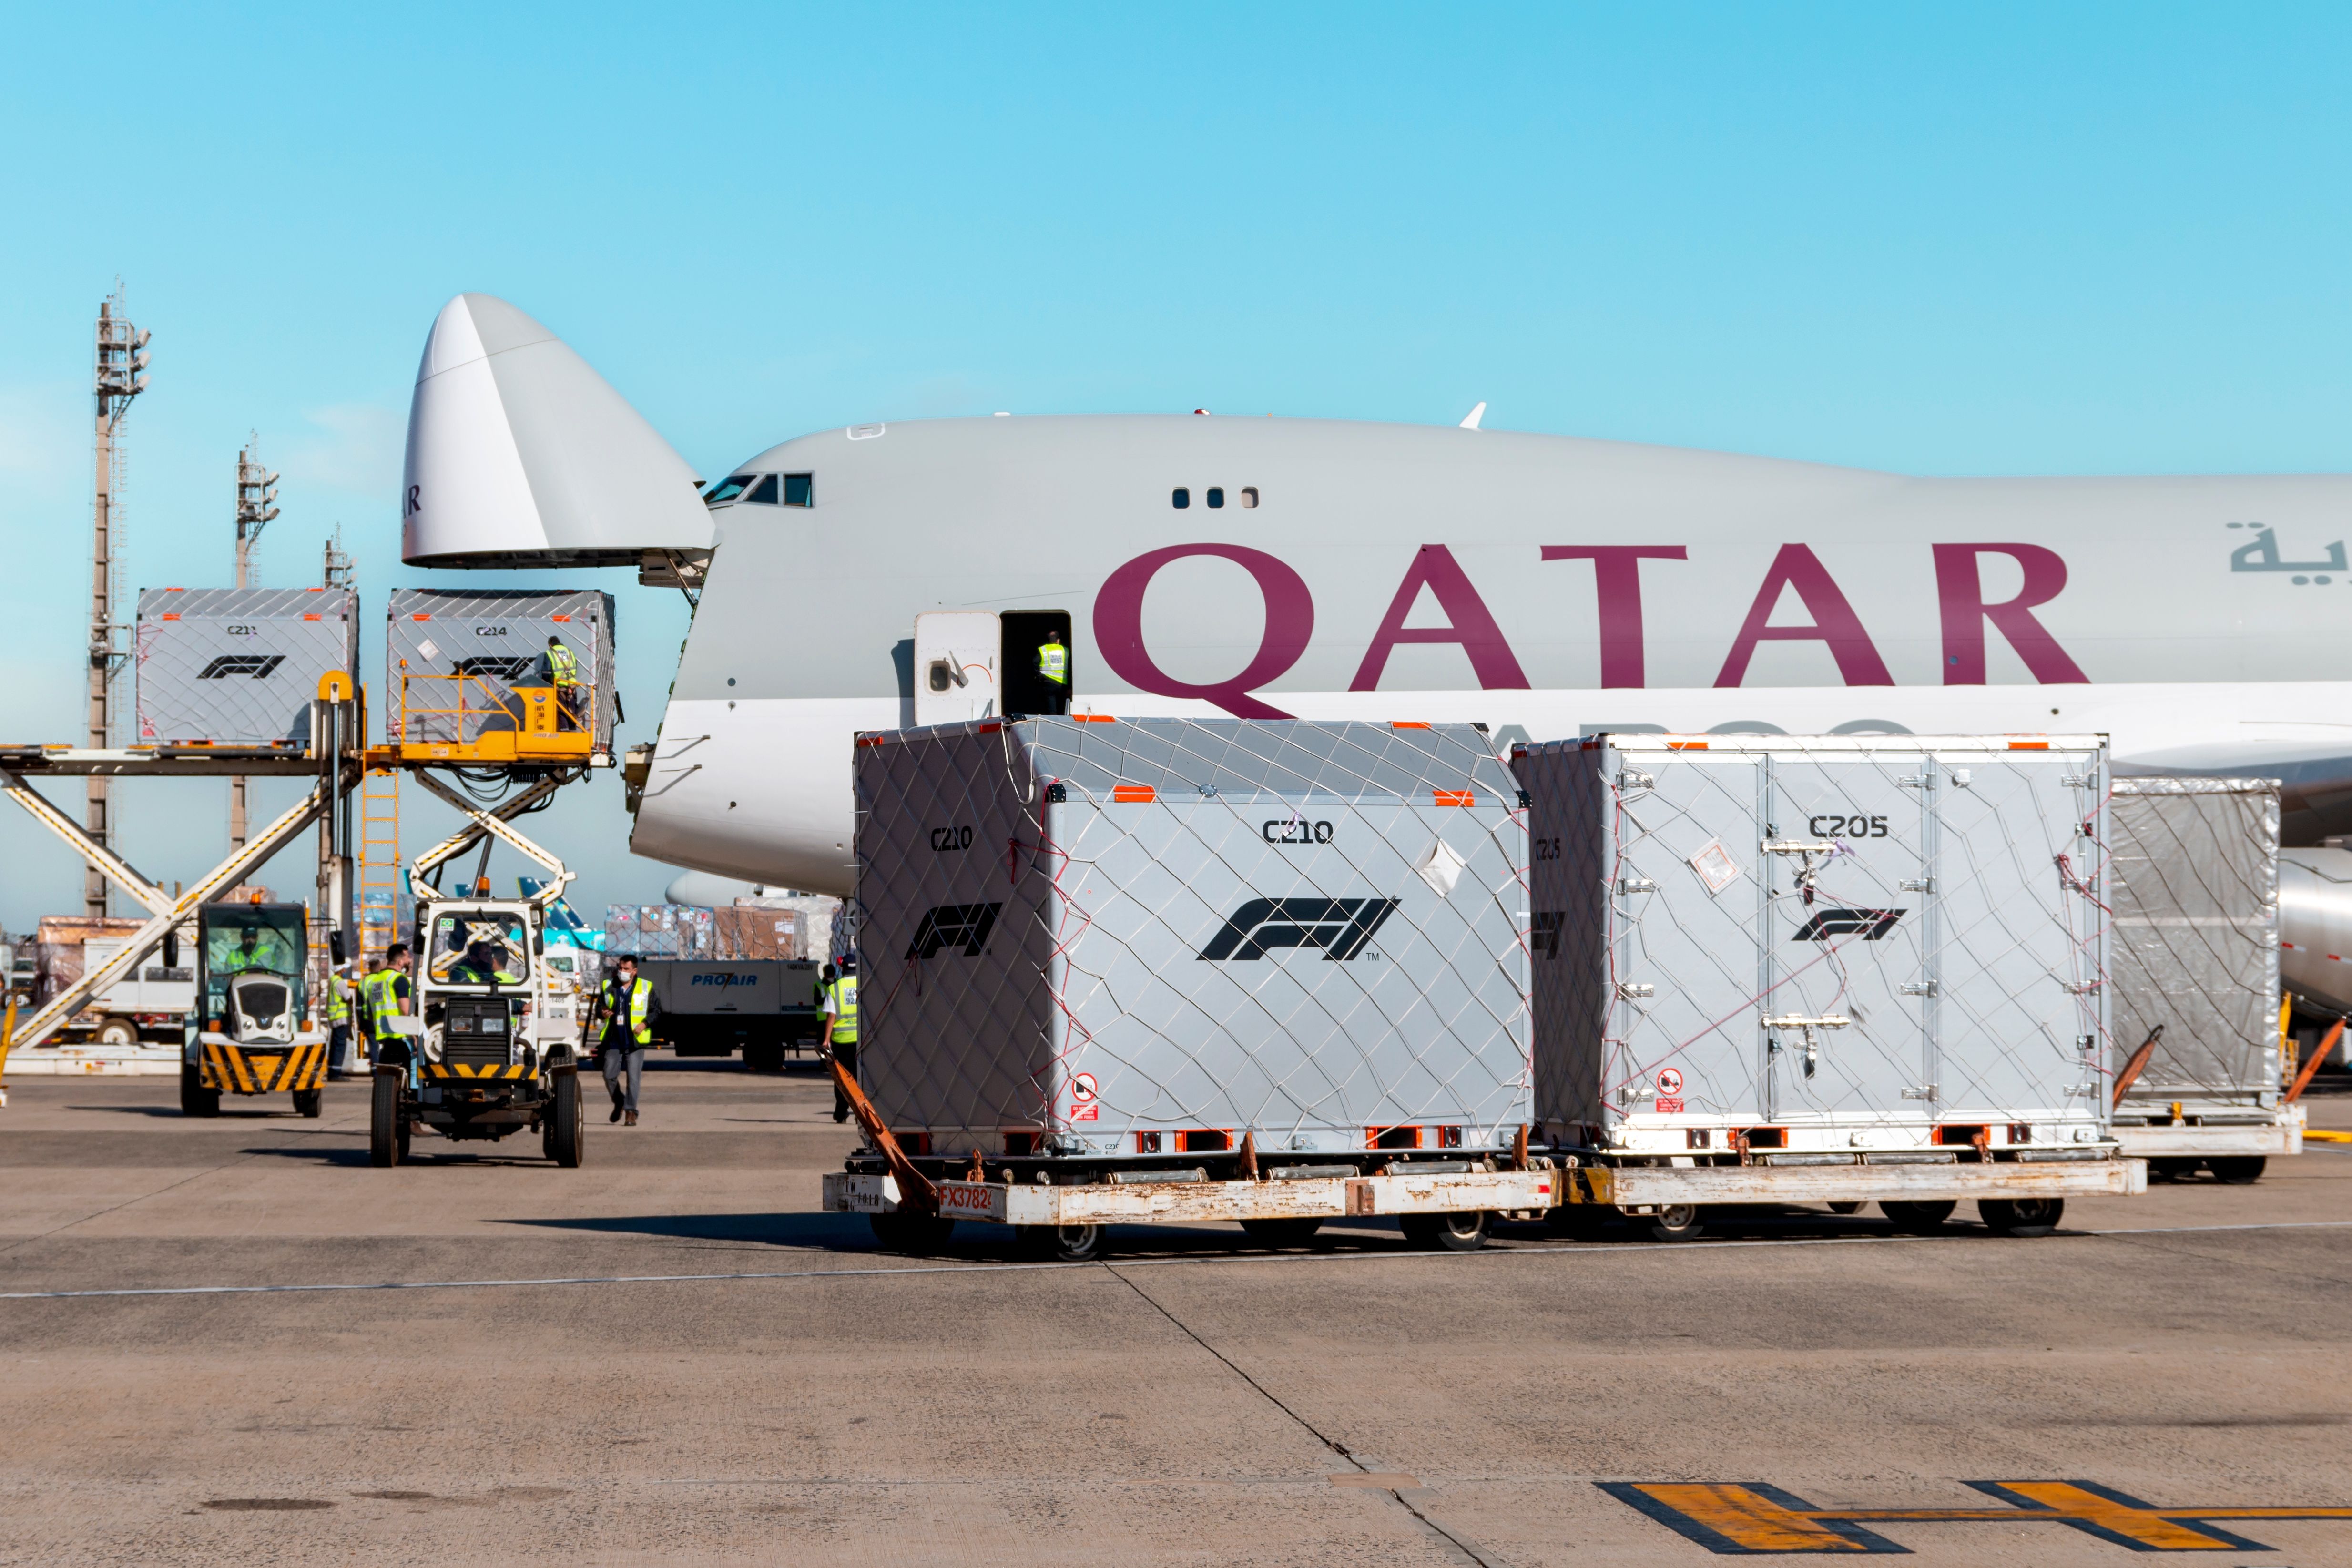 shutterstock_2076591493 - Qatar Cargo Boeing 747-8 being loaded with formula 1 container at Viracopos Airport Sao Paulo Brazil 2021